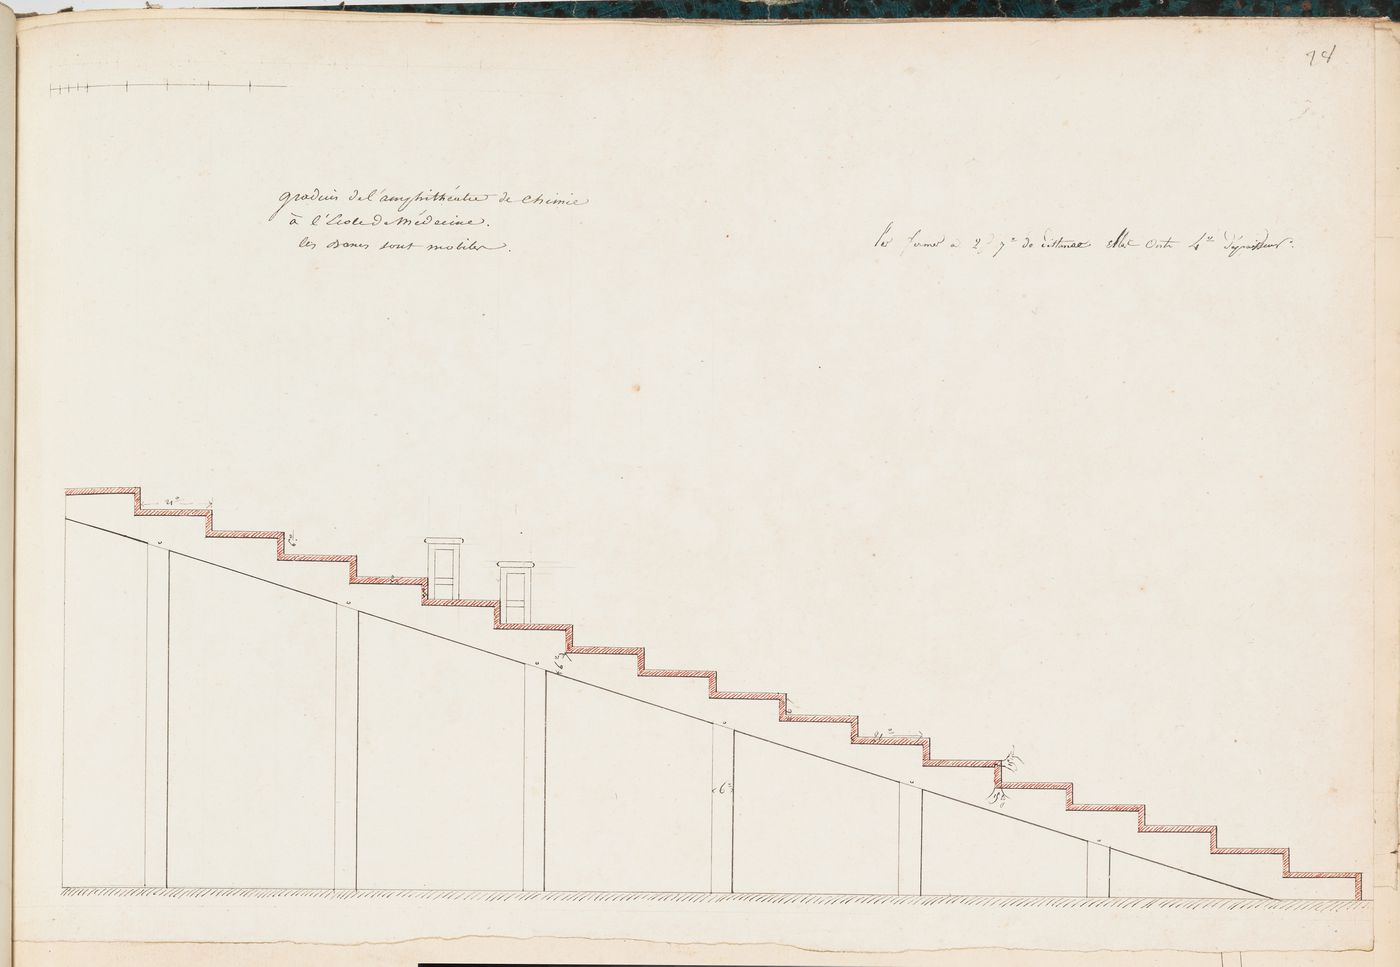 Project for the redevelopment of the École de médecine and surrounding area, Paris: Section through the tiers of seats for the second ampitheatre for the École de médecine